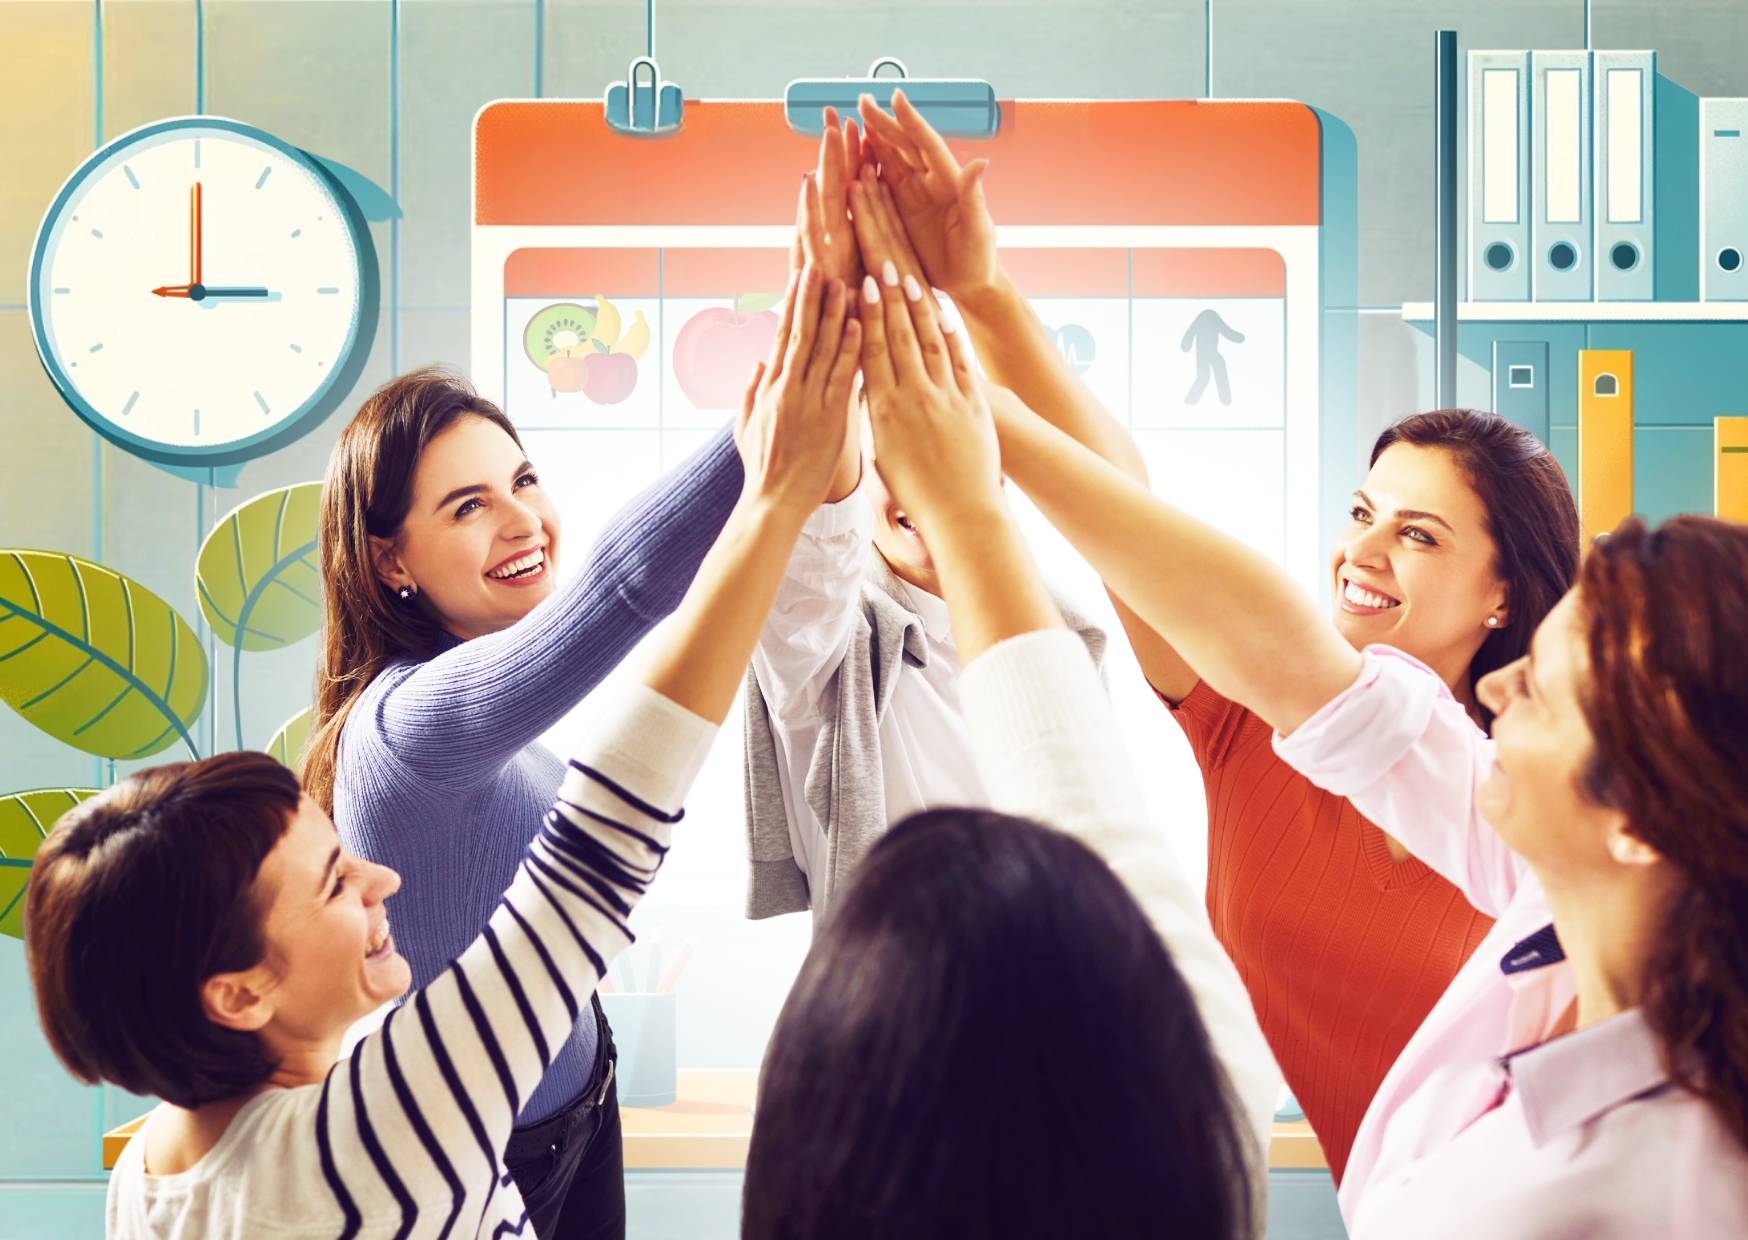 employees-with-hands-in-the-air-with-a-group-high-five-and-a-calendar-in-the-background-with-workplace-healthy-habits